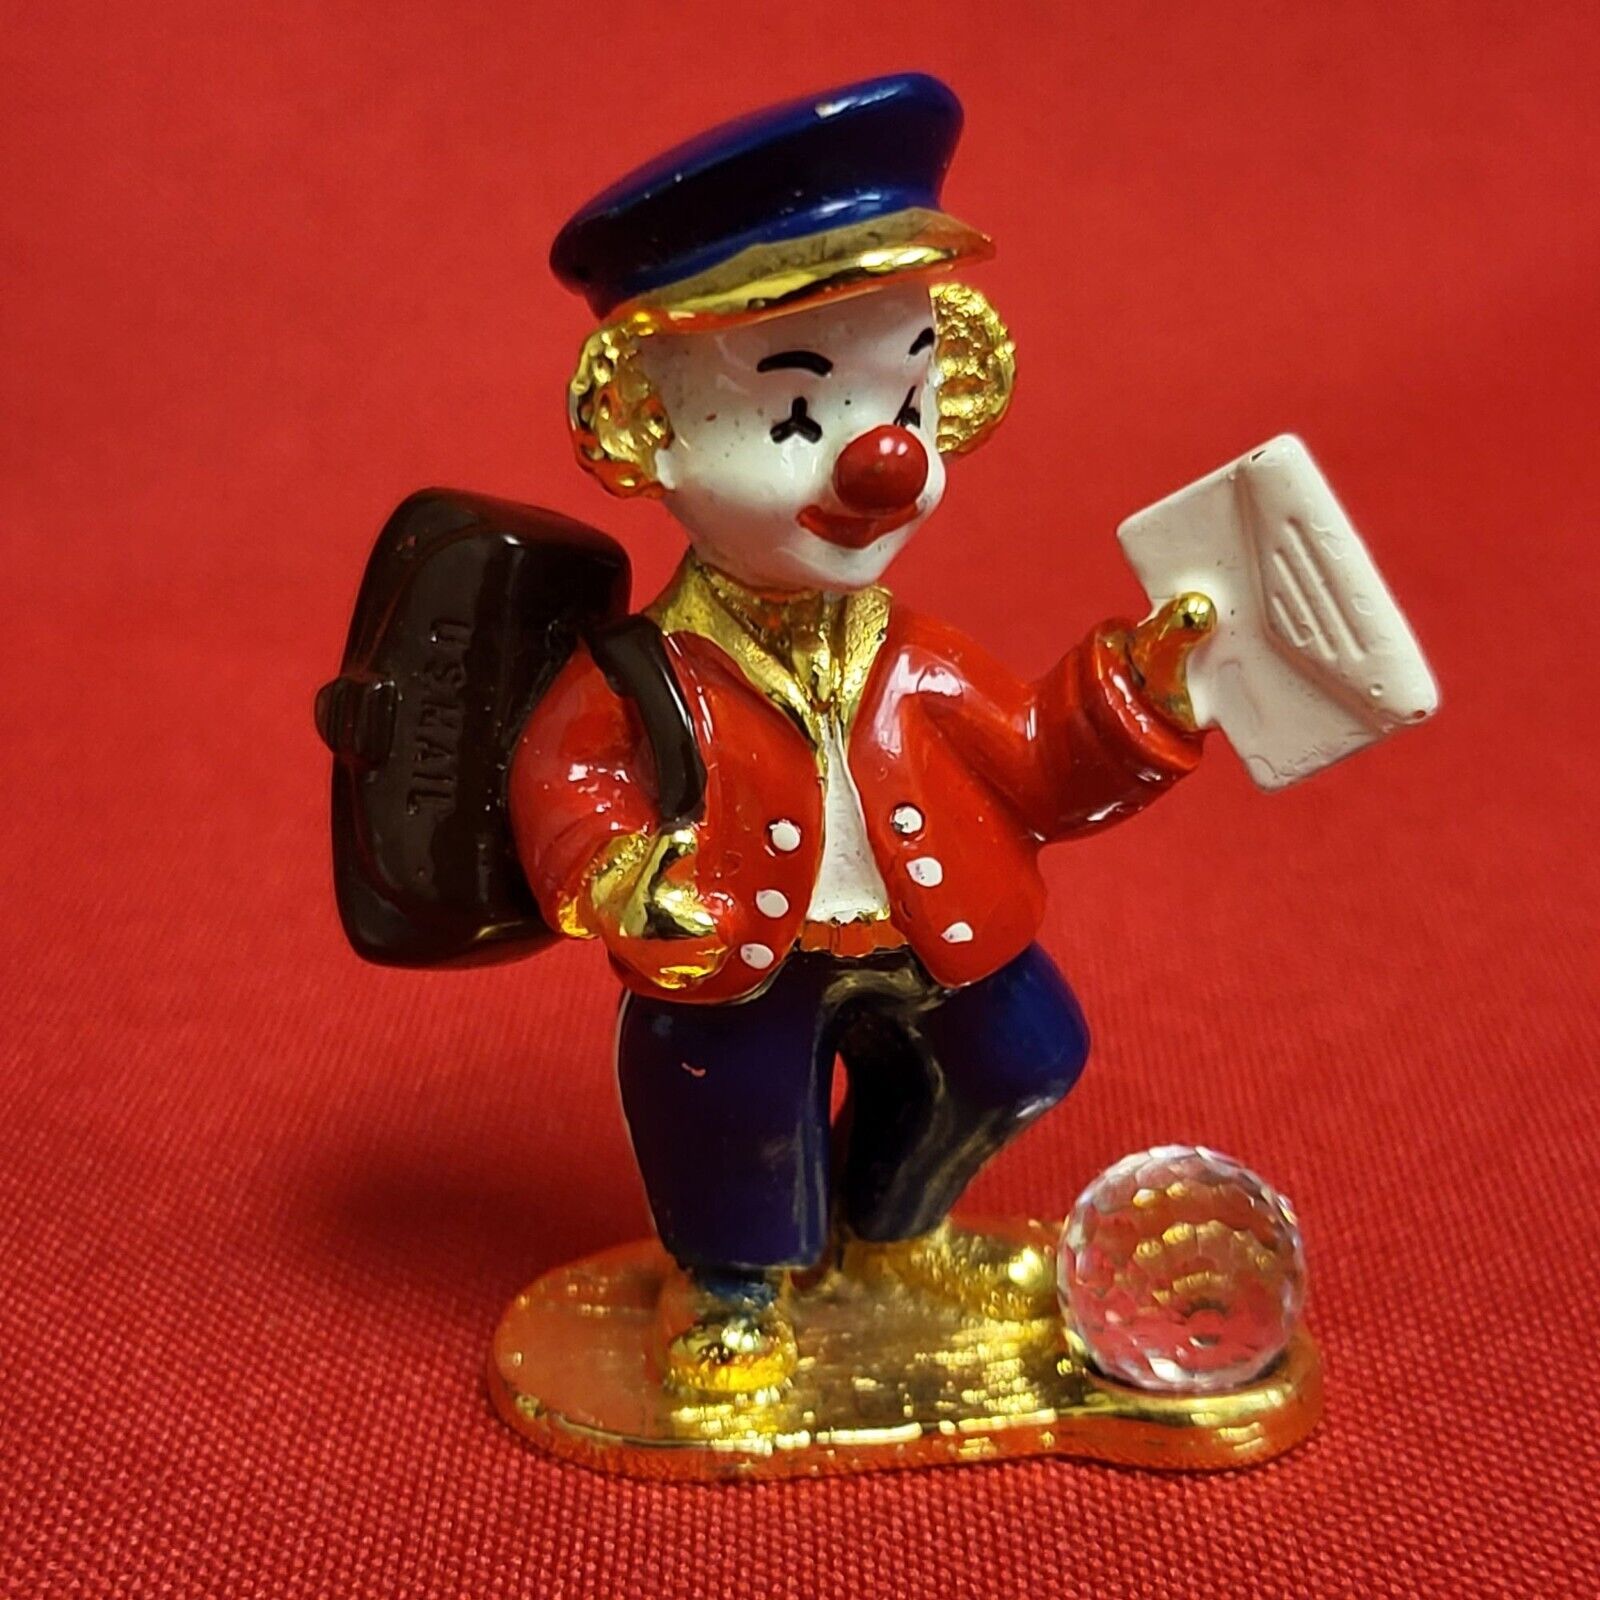 VTG Spoontiques  Pewter Miniature Gold Clown Mailman with Swarovski Crystal